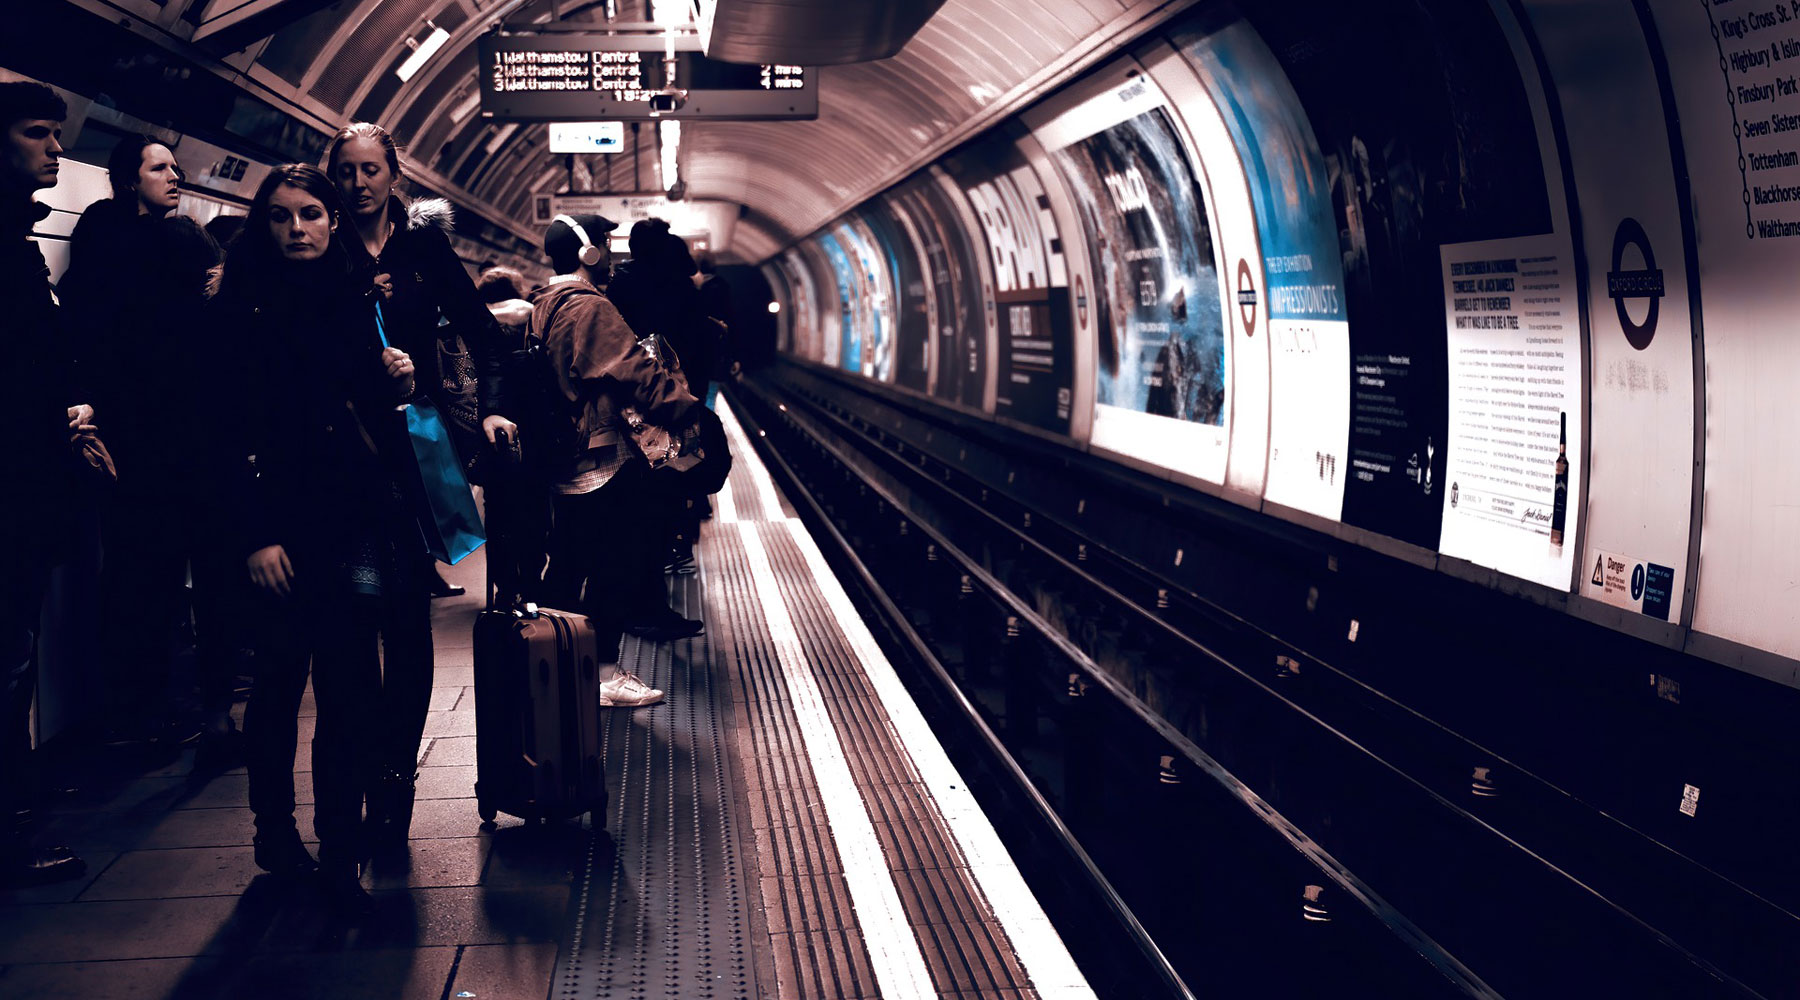 Inspector Sands and why the London Underground keeps asking for him